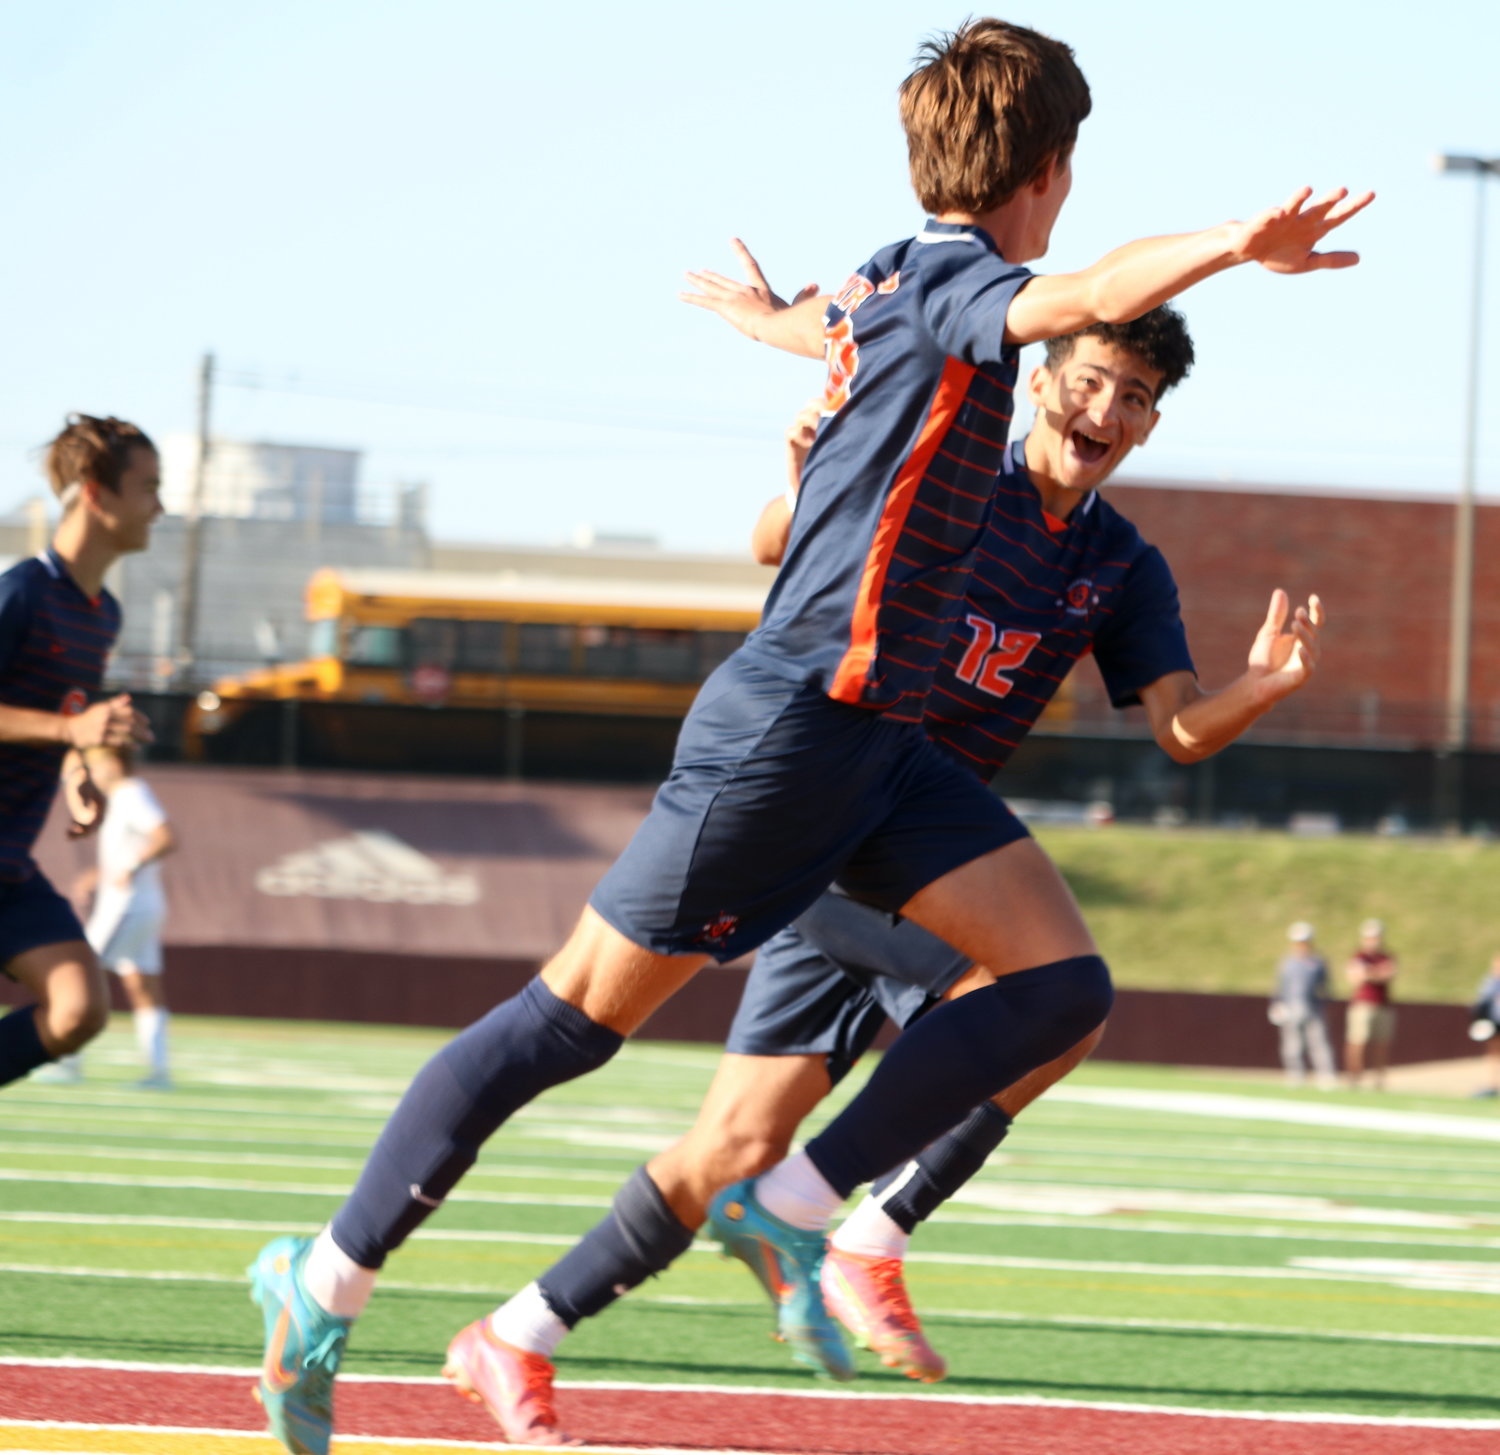 Aidan Morrison celebrates after his penalty kick goal during Friday’s Class 6A Region III Final between Seven Lakes and Deer Park at Abshire Stadium in Deer Park.